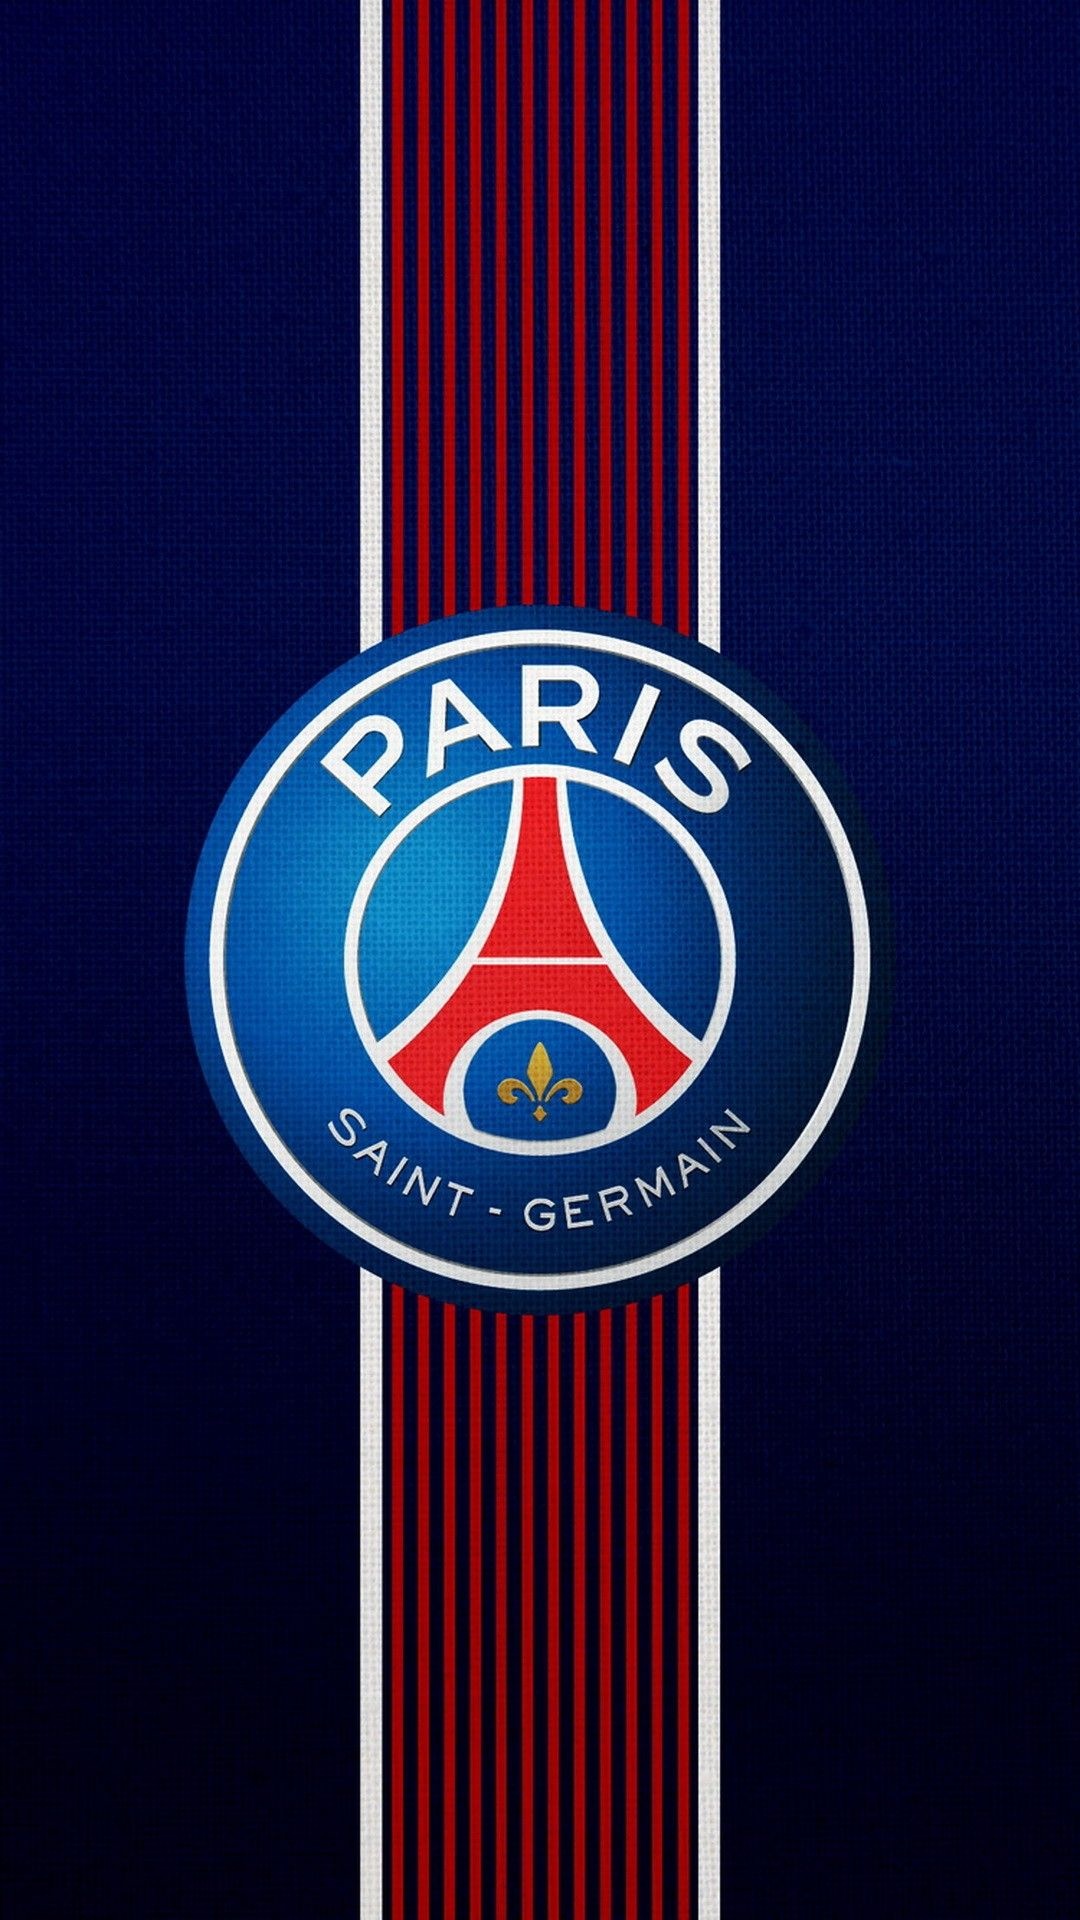 Paris Saint-Germain: The most successful French club in history in terms of official titles won, with 47. 1080x1920 Full HD Wallpaper.